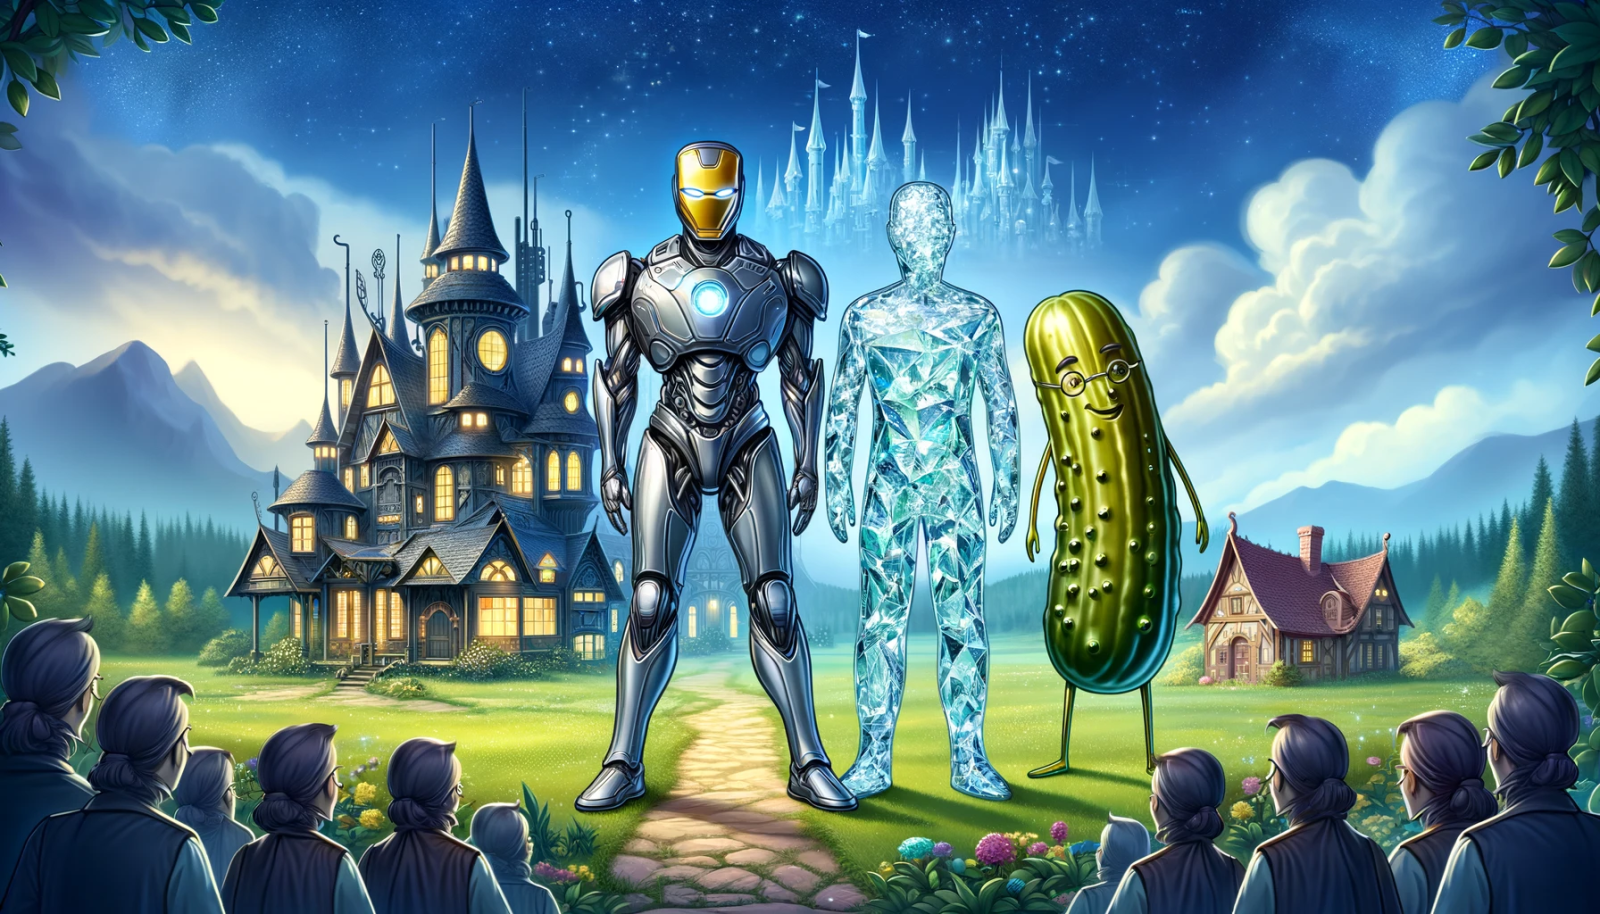 Mr. Iron, Mr. Glass, and Mr. Pickle. Mr. Iron was made of Iron, Mr. Glass was made of glass, and Mr. Pickle was made of pickles